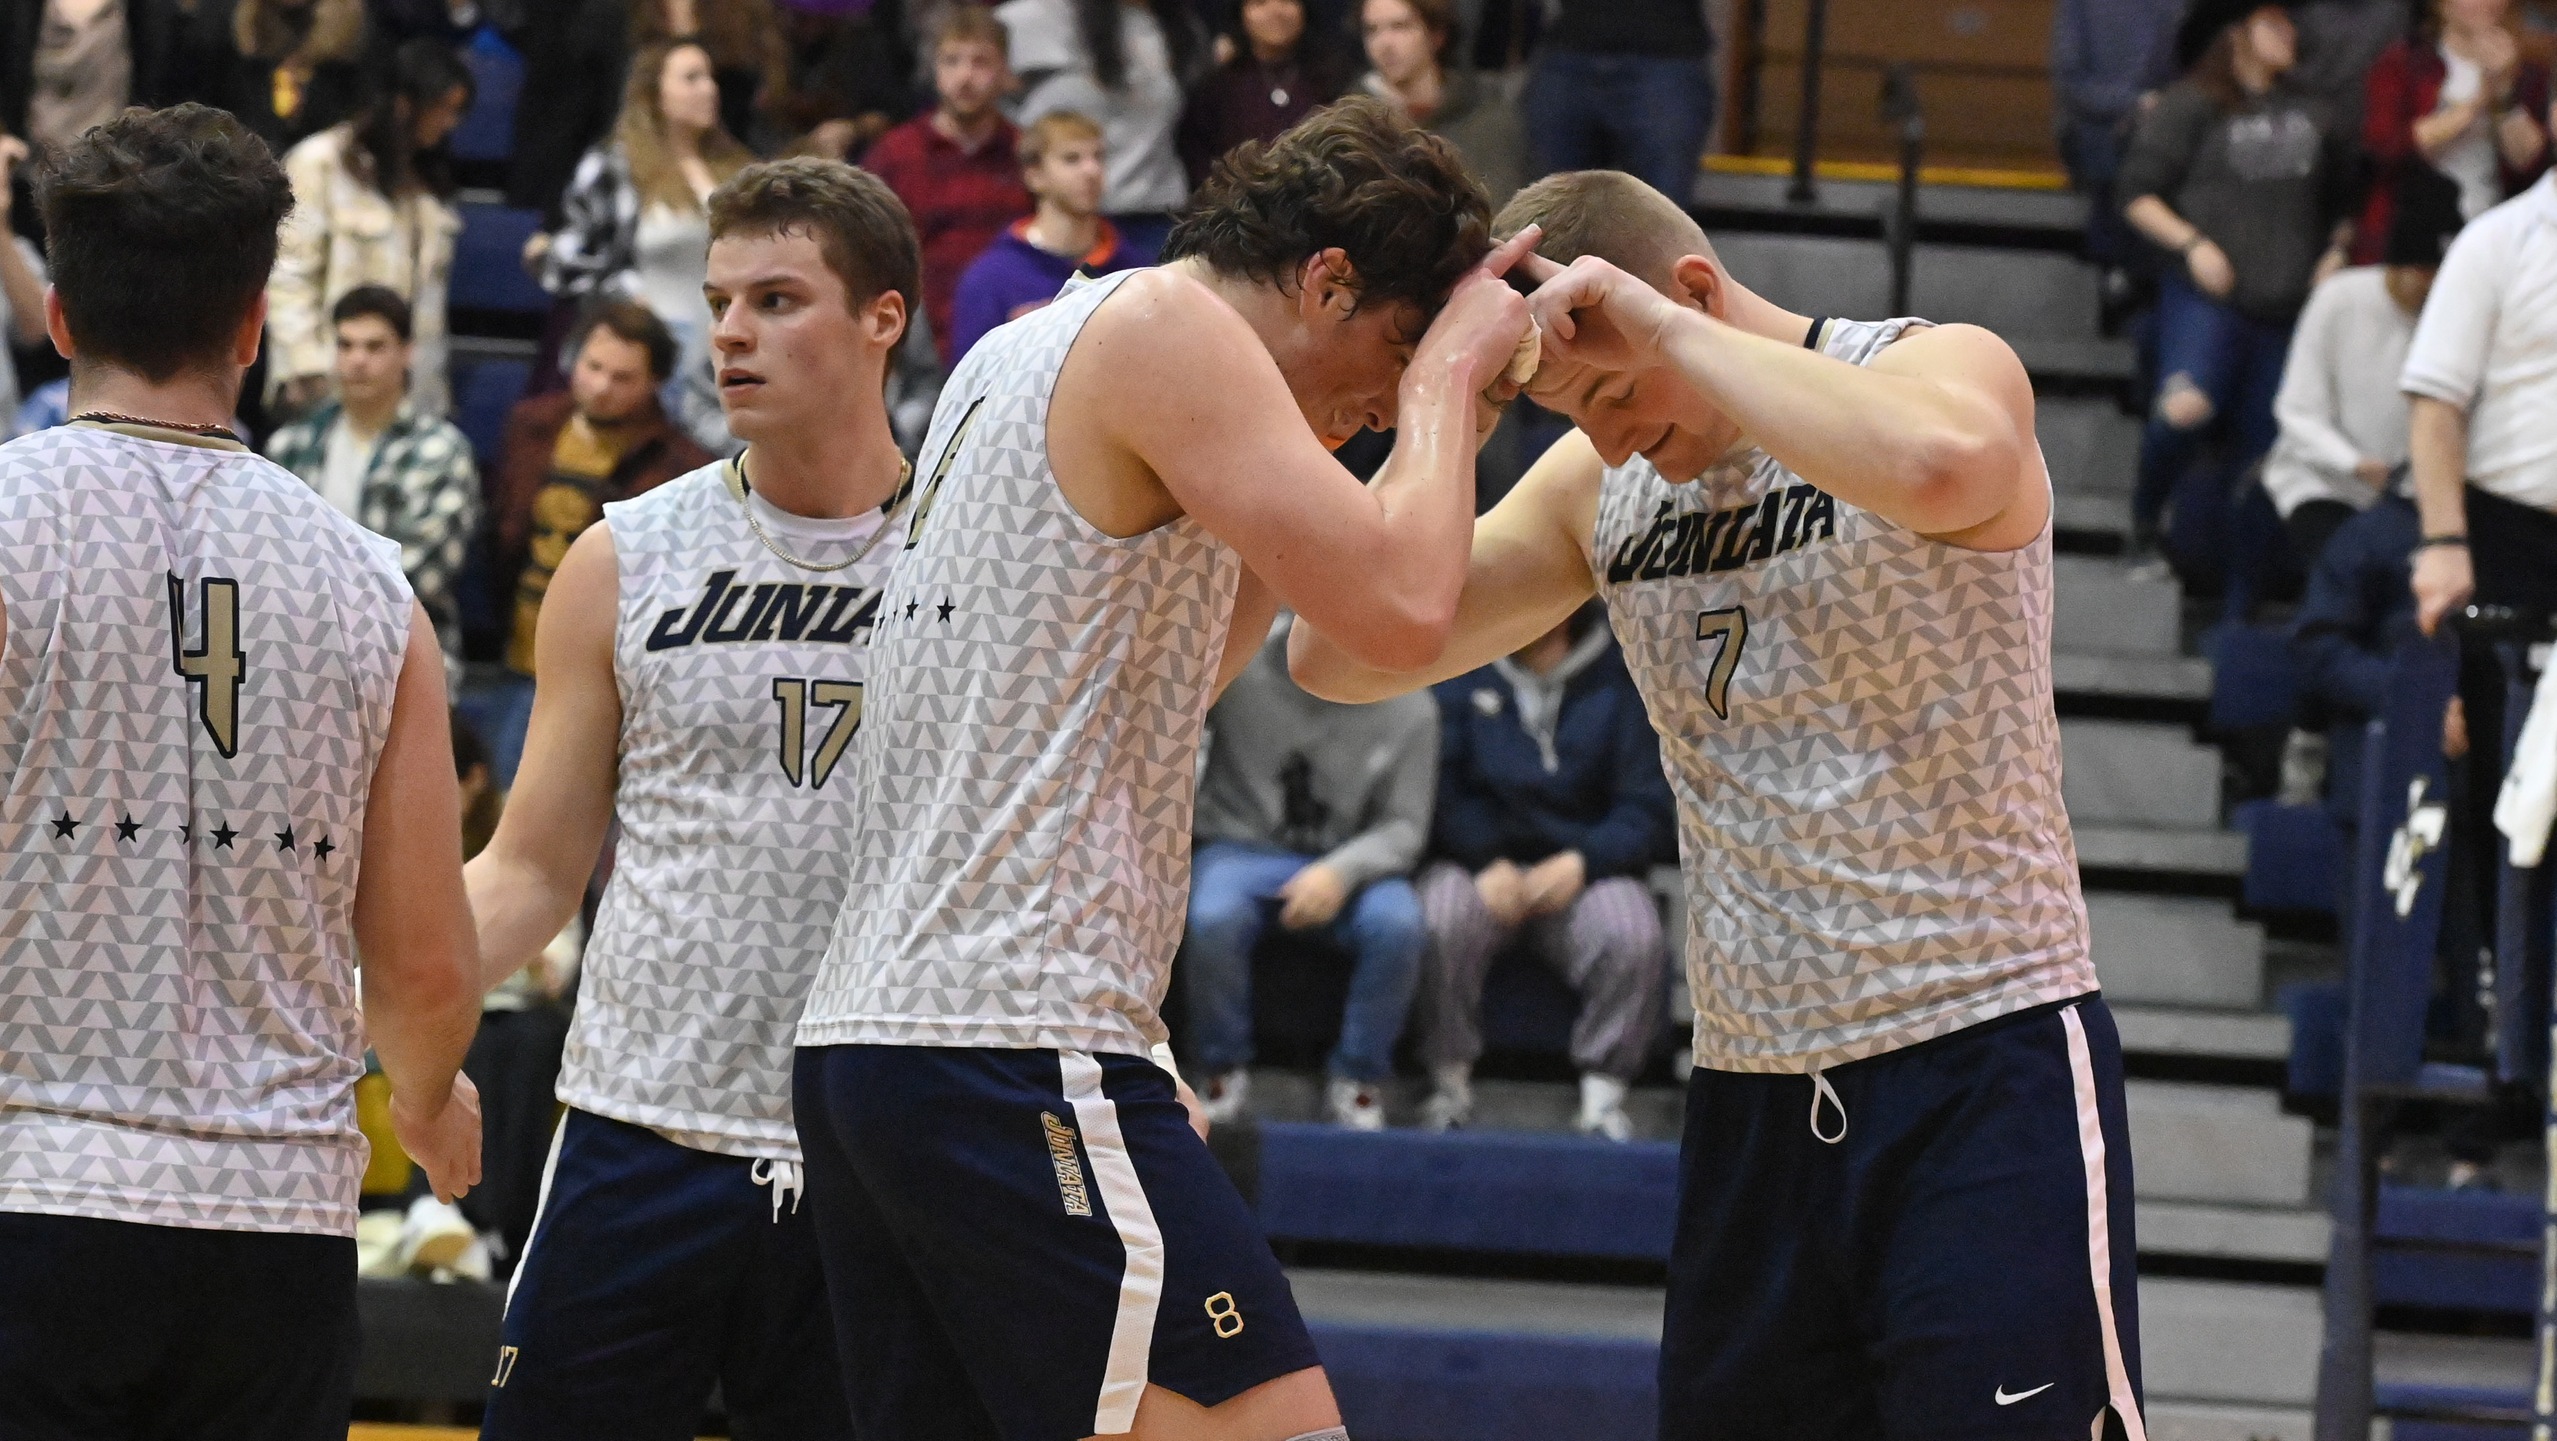 Men's Volleyball Sweeps Geneva, Tops #8 St John Fisher on Day One of the Juniata Invitational